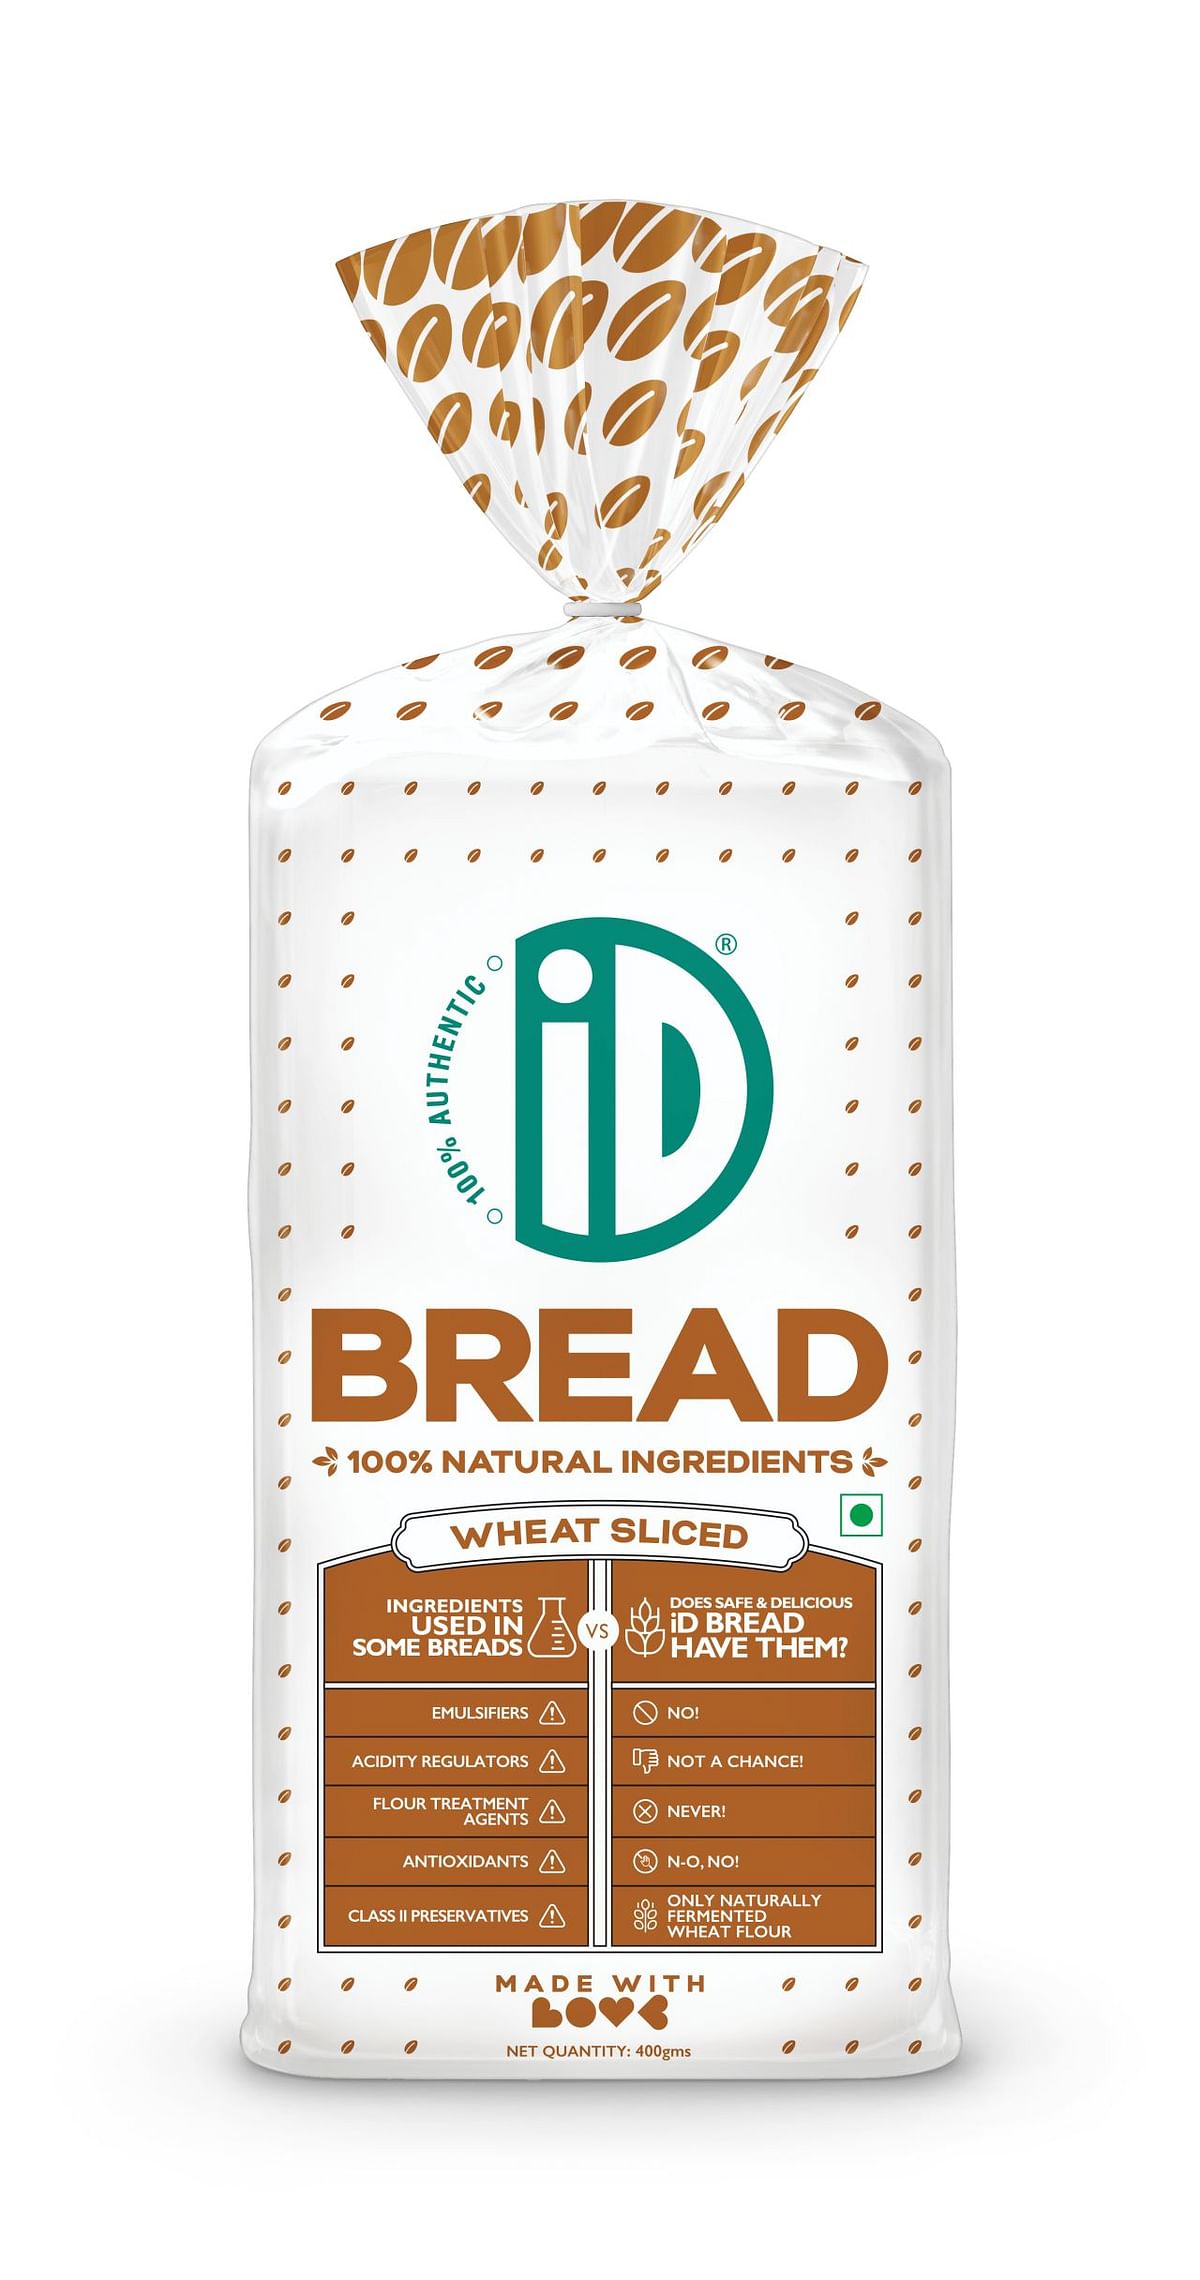 iD Fresh Food launches bread; to take on branded players, local bakeries